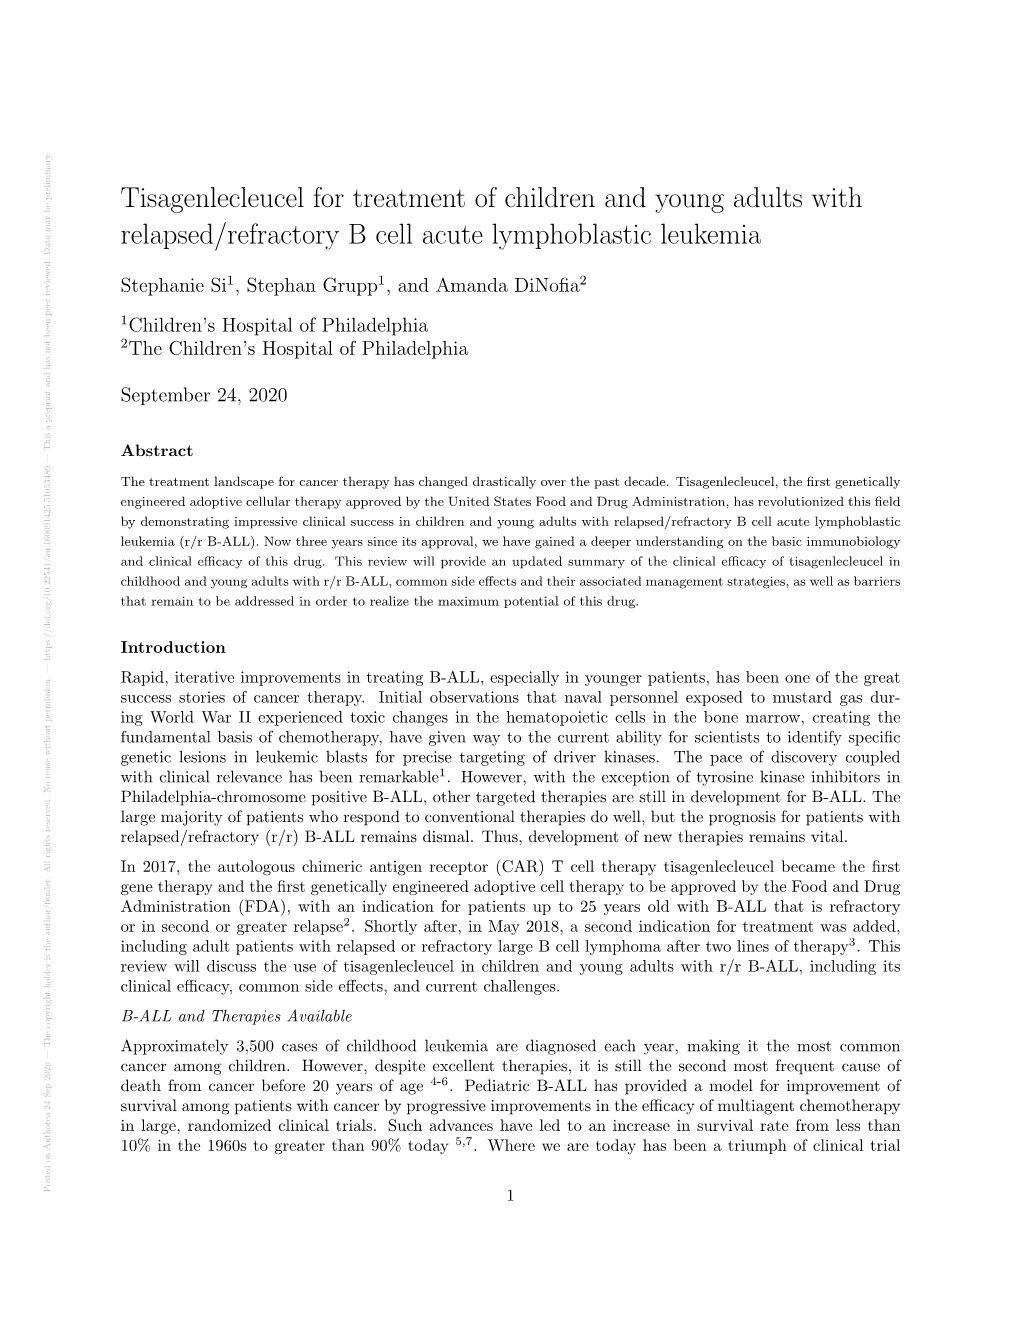 Tisagenlecleucel for Treatment of Children and Young Adults With